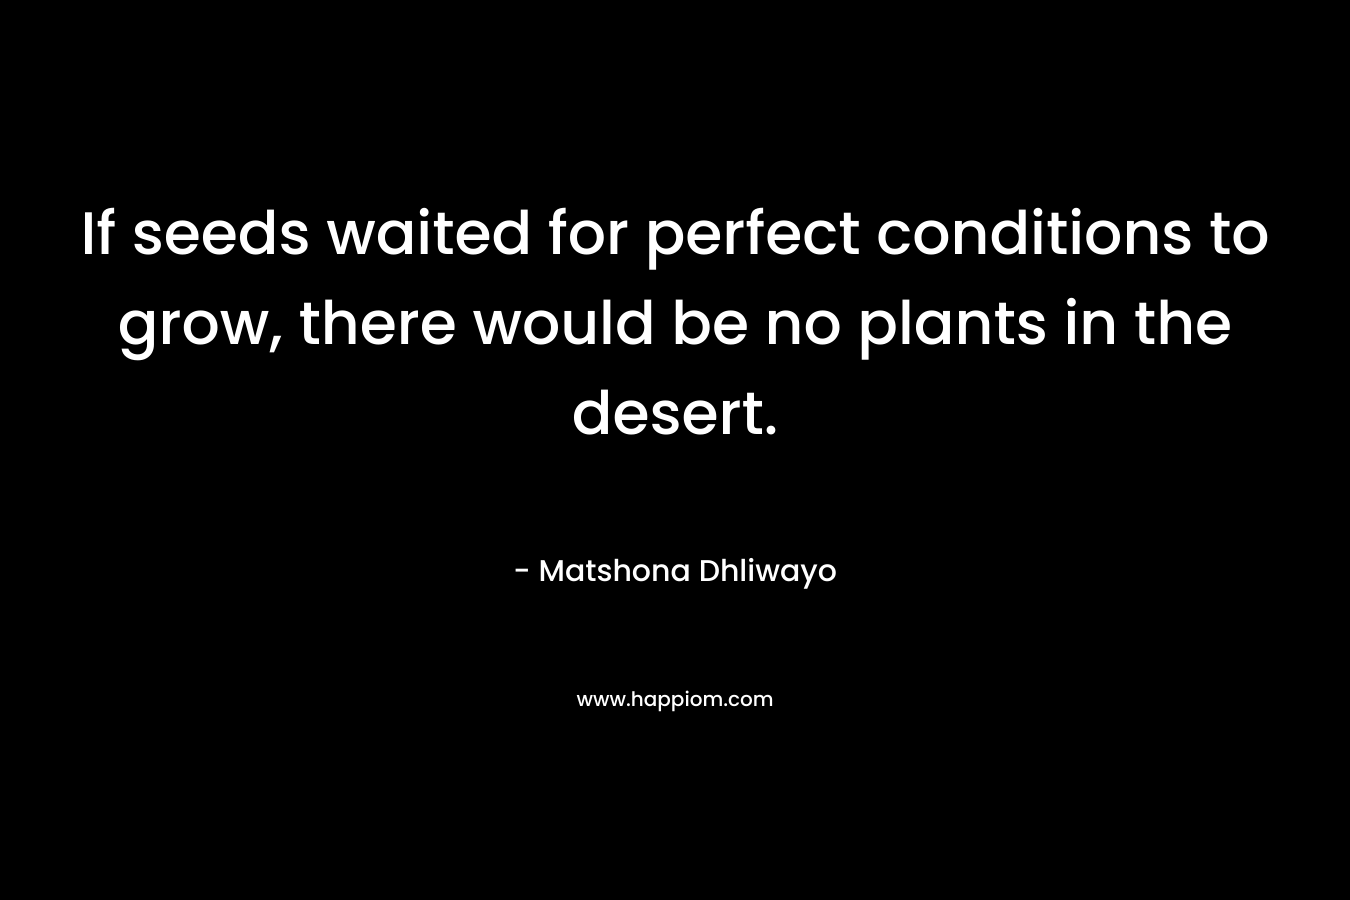 If seeds waited for perfect conditions to grow, there would be no plants in the desert.